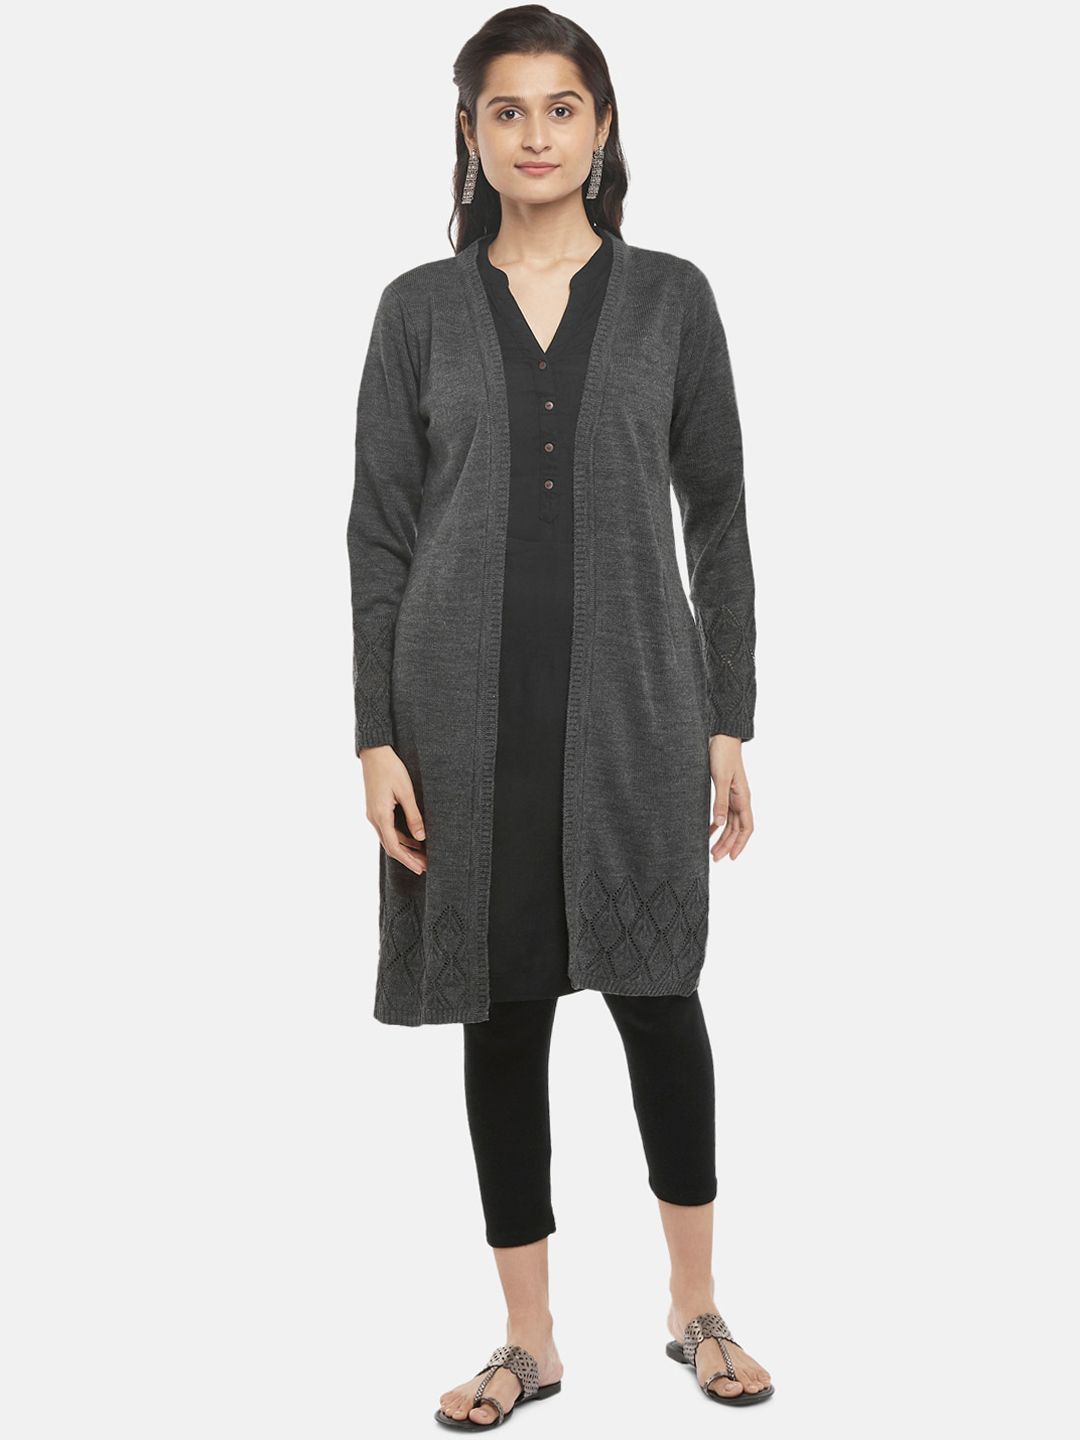 RANGMANCH BY PANTALOONS Women Charcoal Grey Acrylic Longline Open Front Jacket Price in India